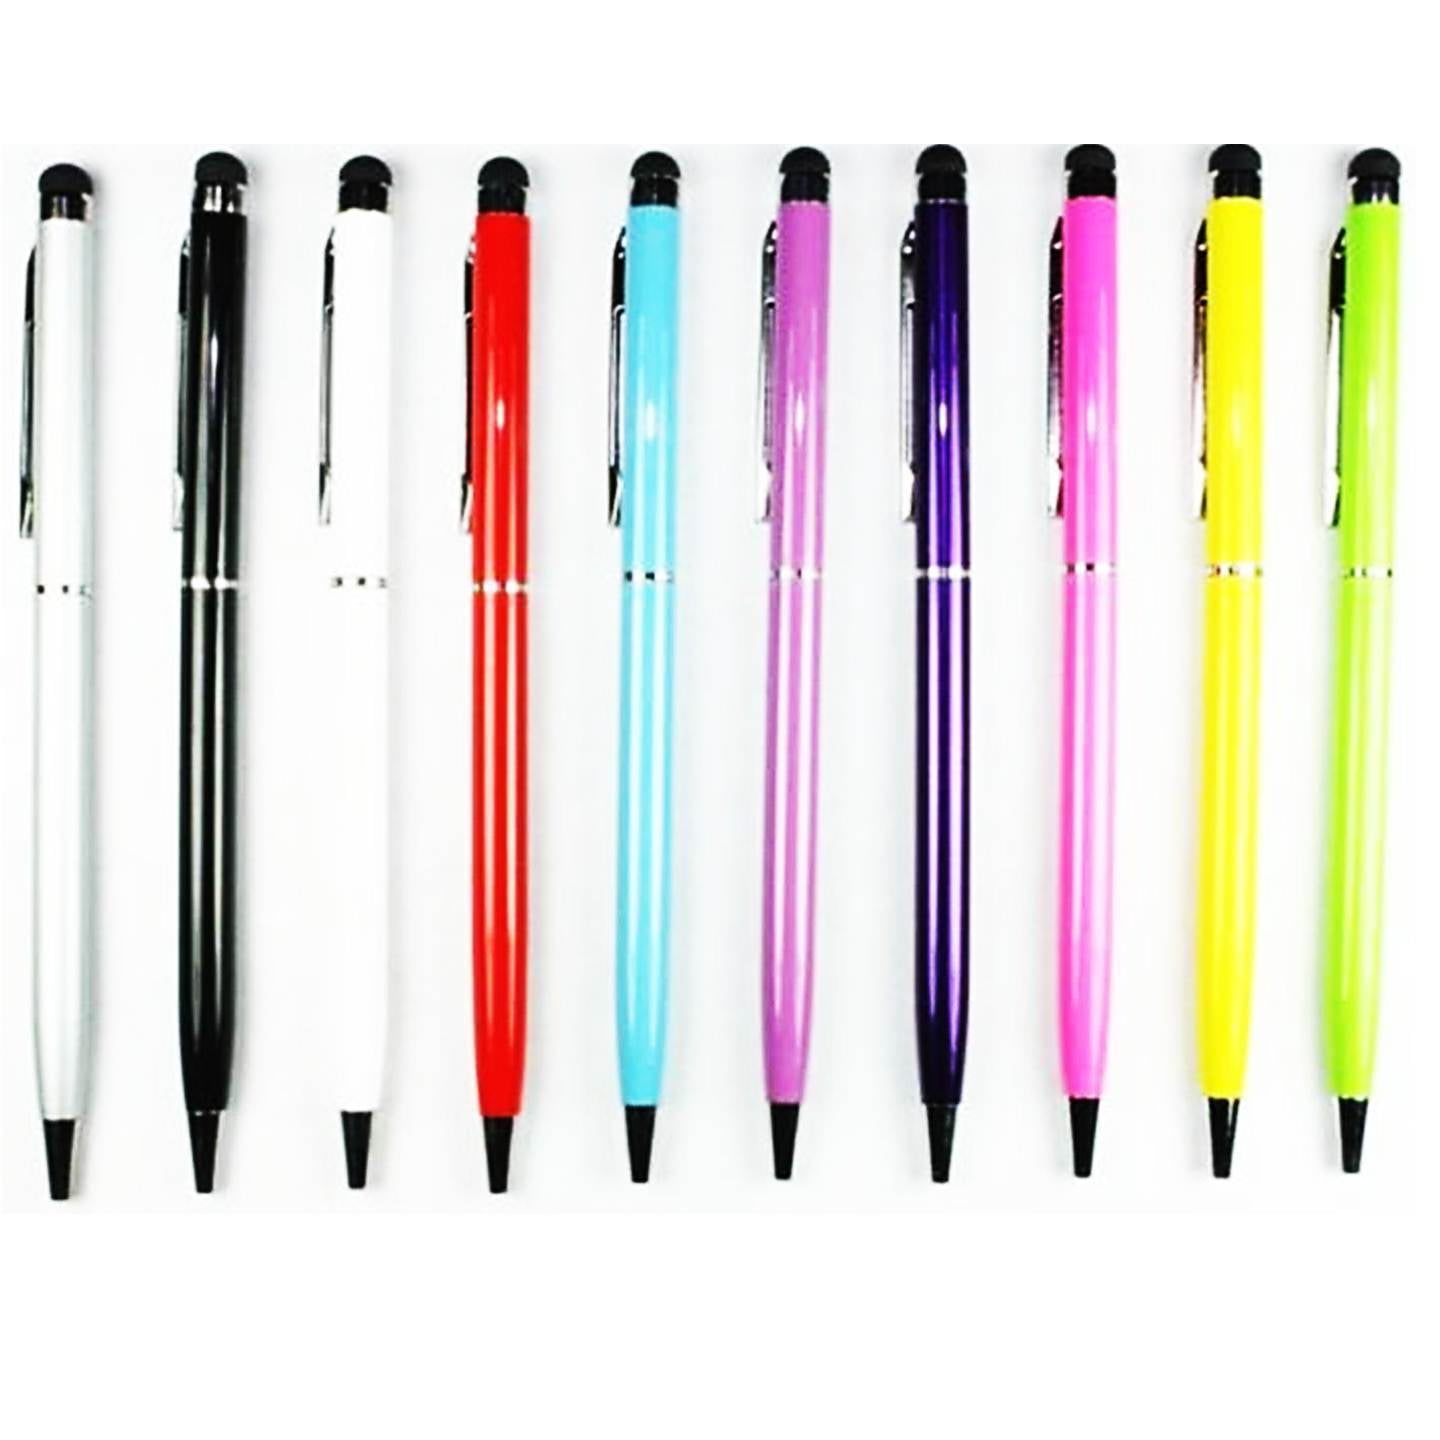 2in1 Touch Screen Stylus+Ballpoint Pen iPad iPhone Tablet Smartphone Multi-Color 